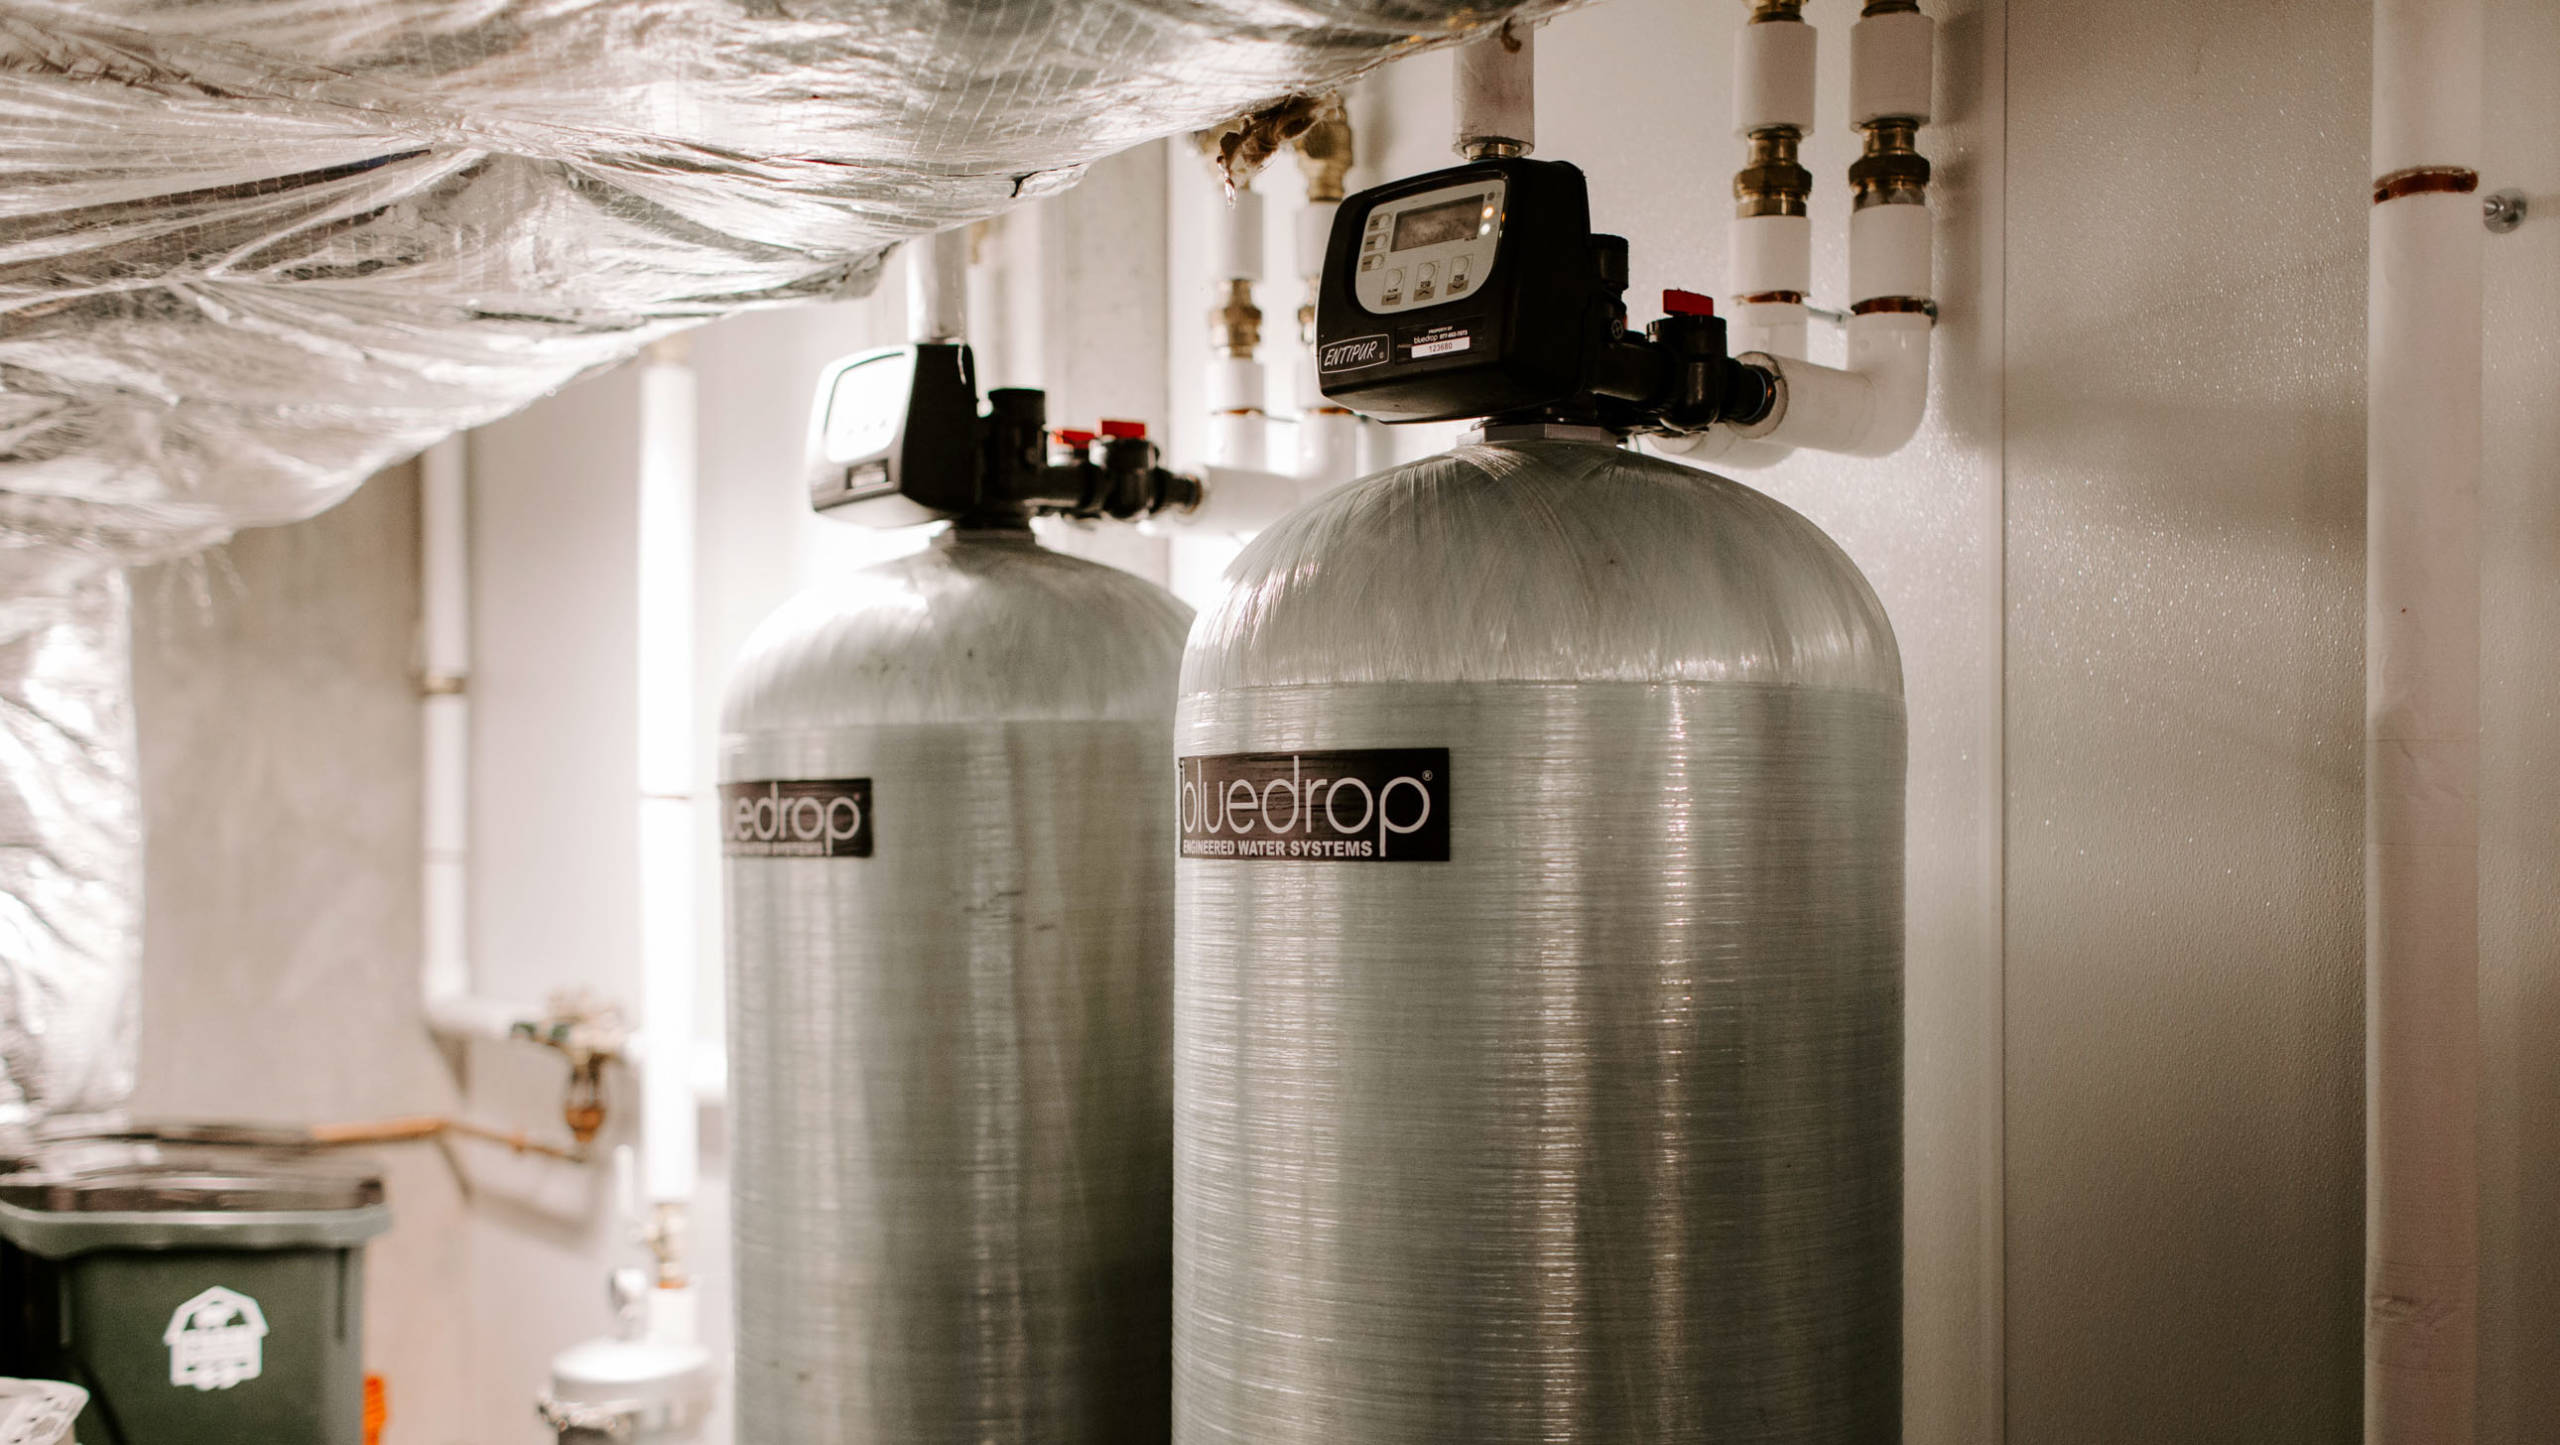 Brewery equipment in large canisters.